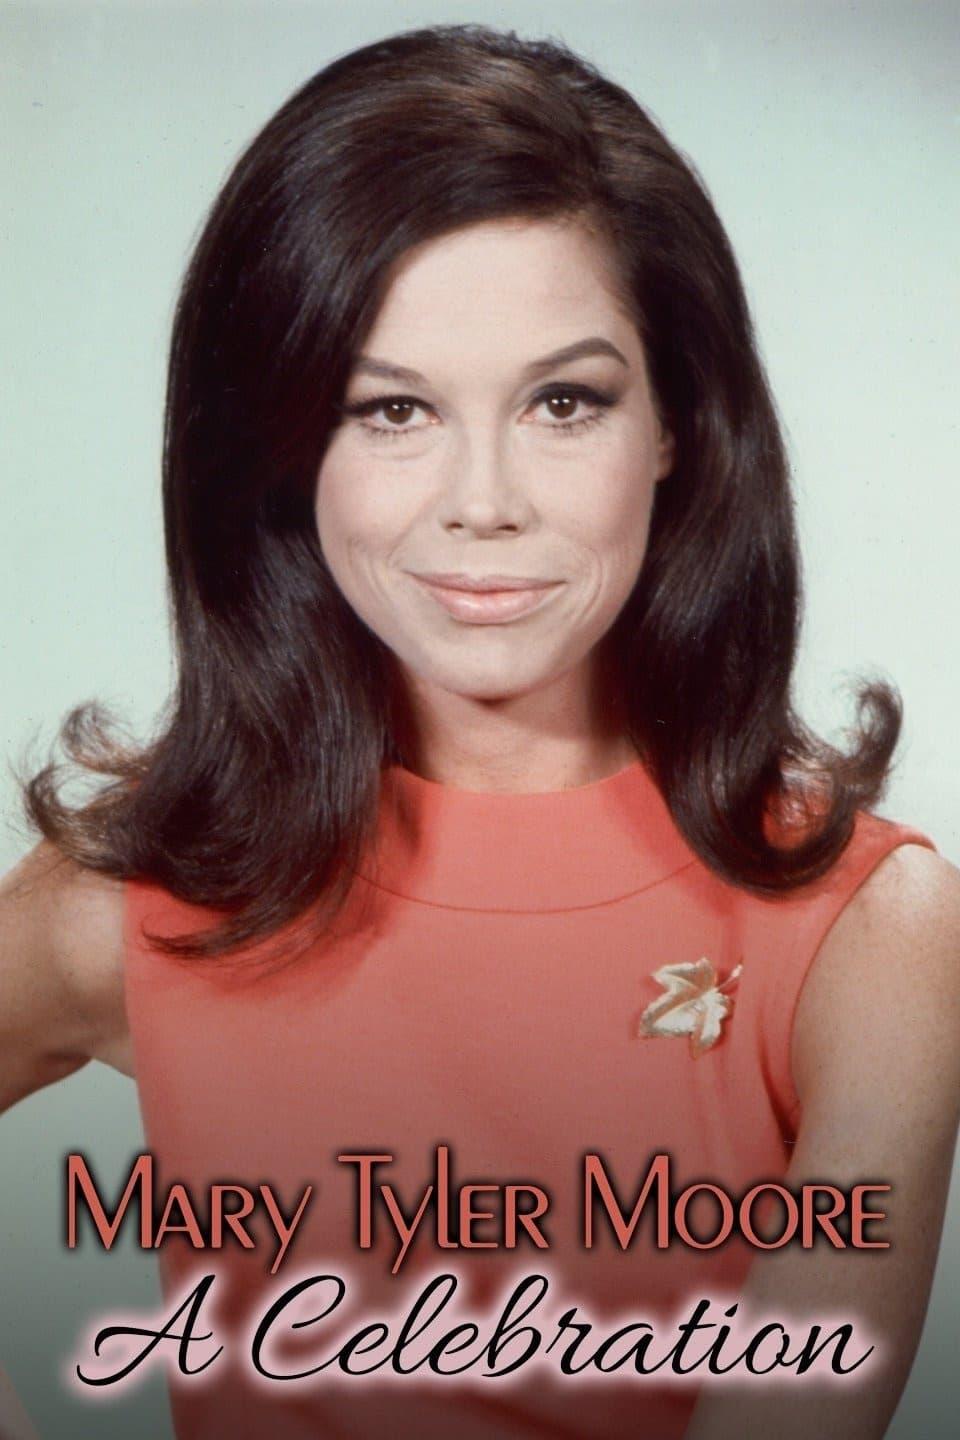 Mary Tyler Moore: A Celebration poster